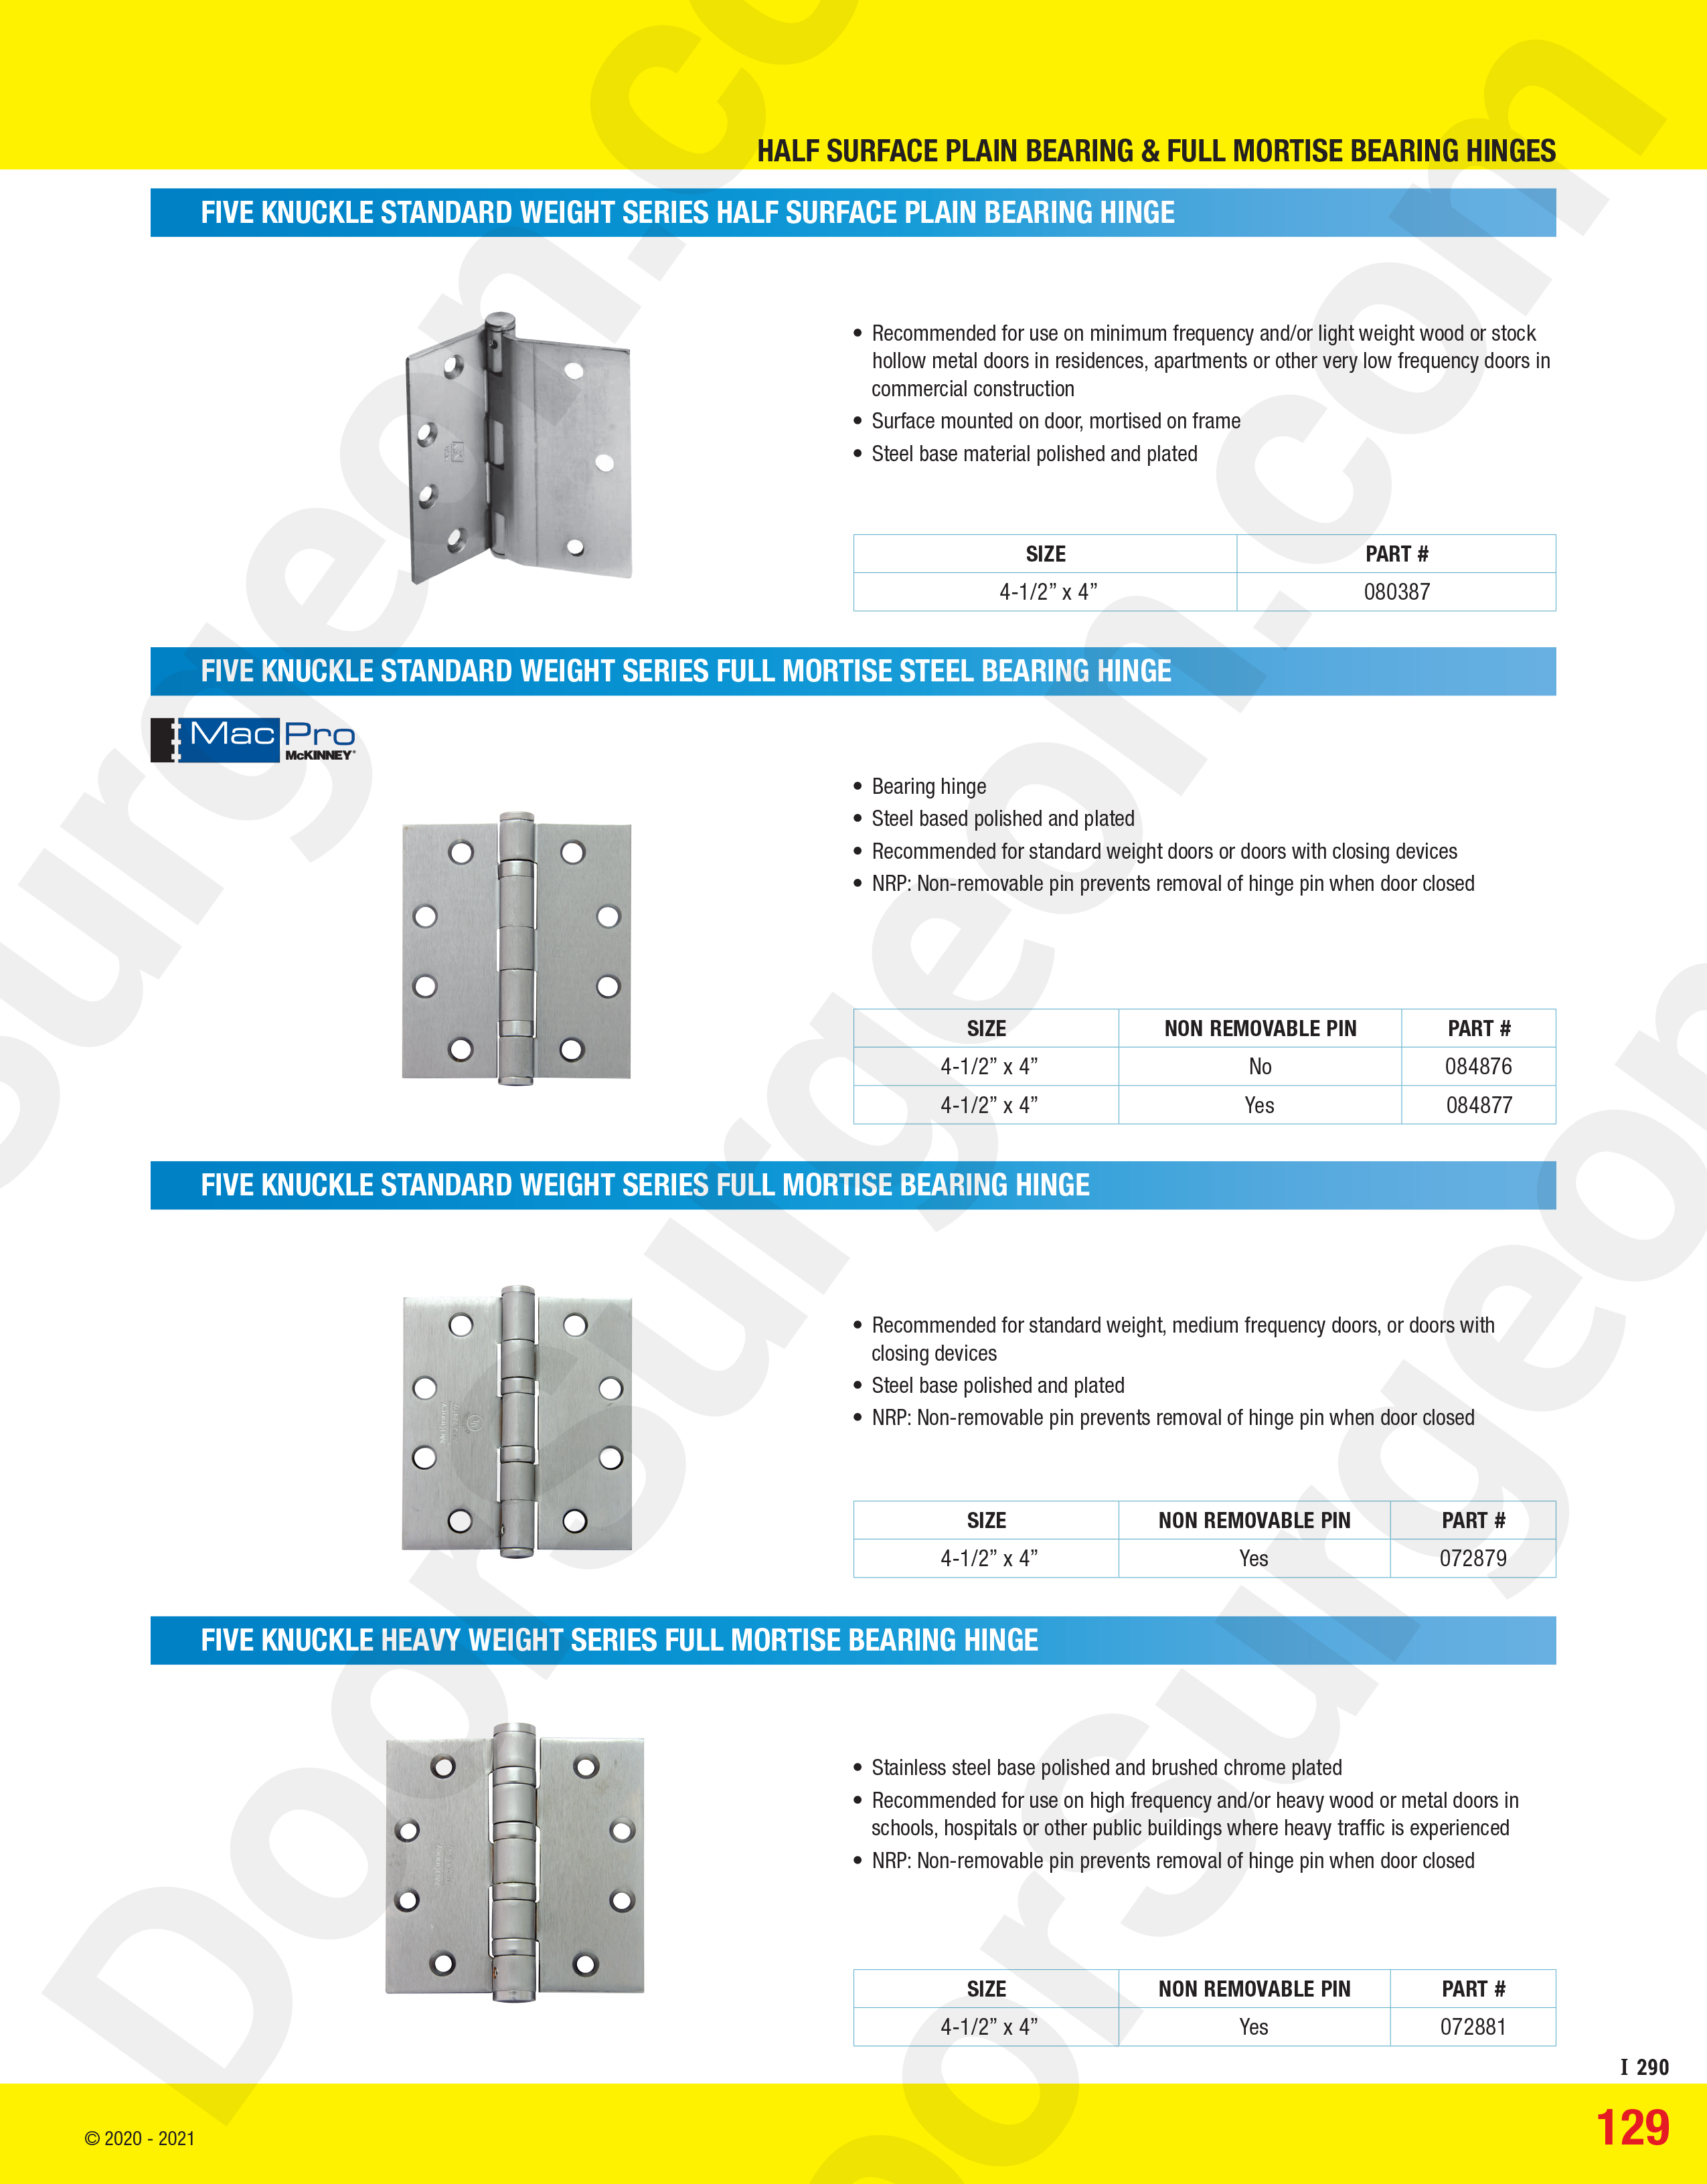 Door Surgeon carry and install Half surface plain bearing and full mortise bearing hinges.